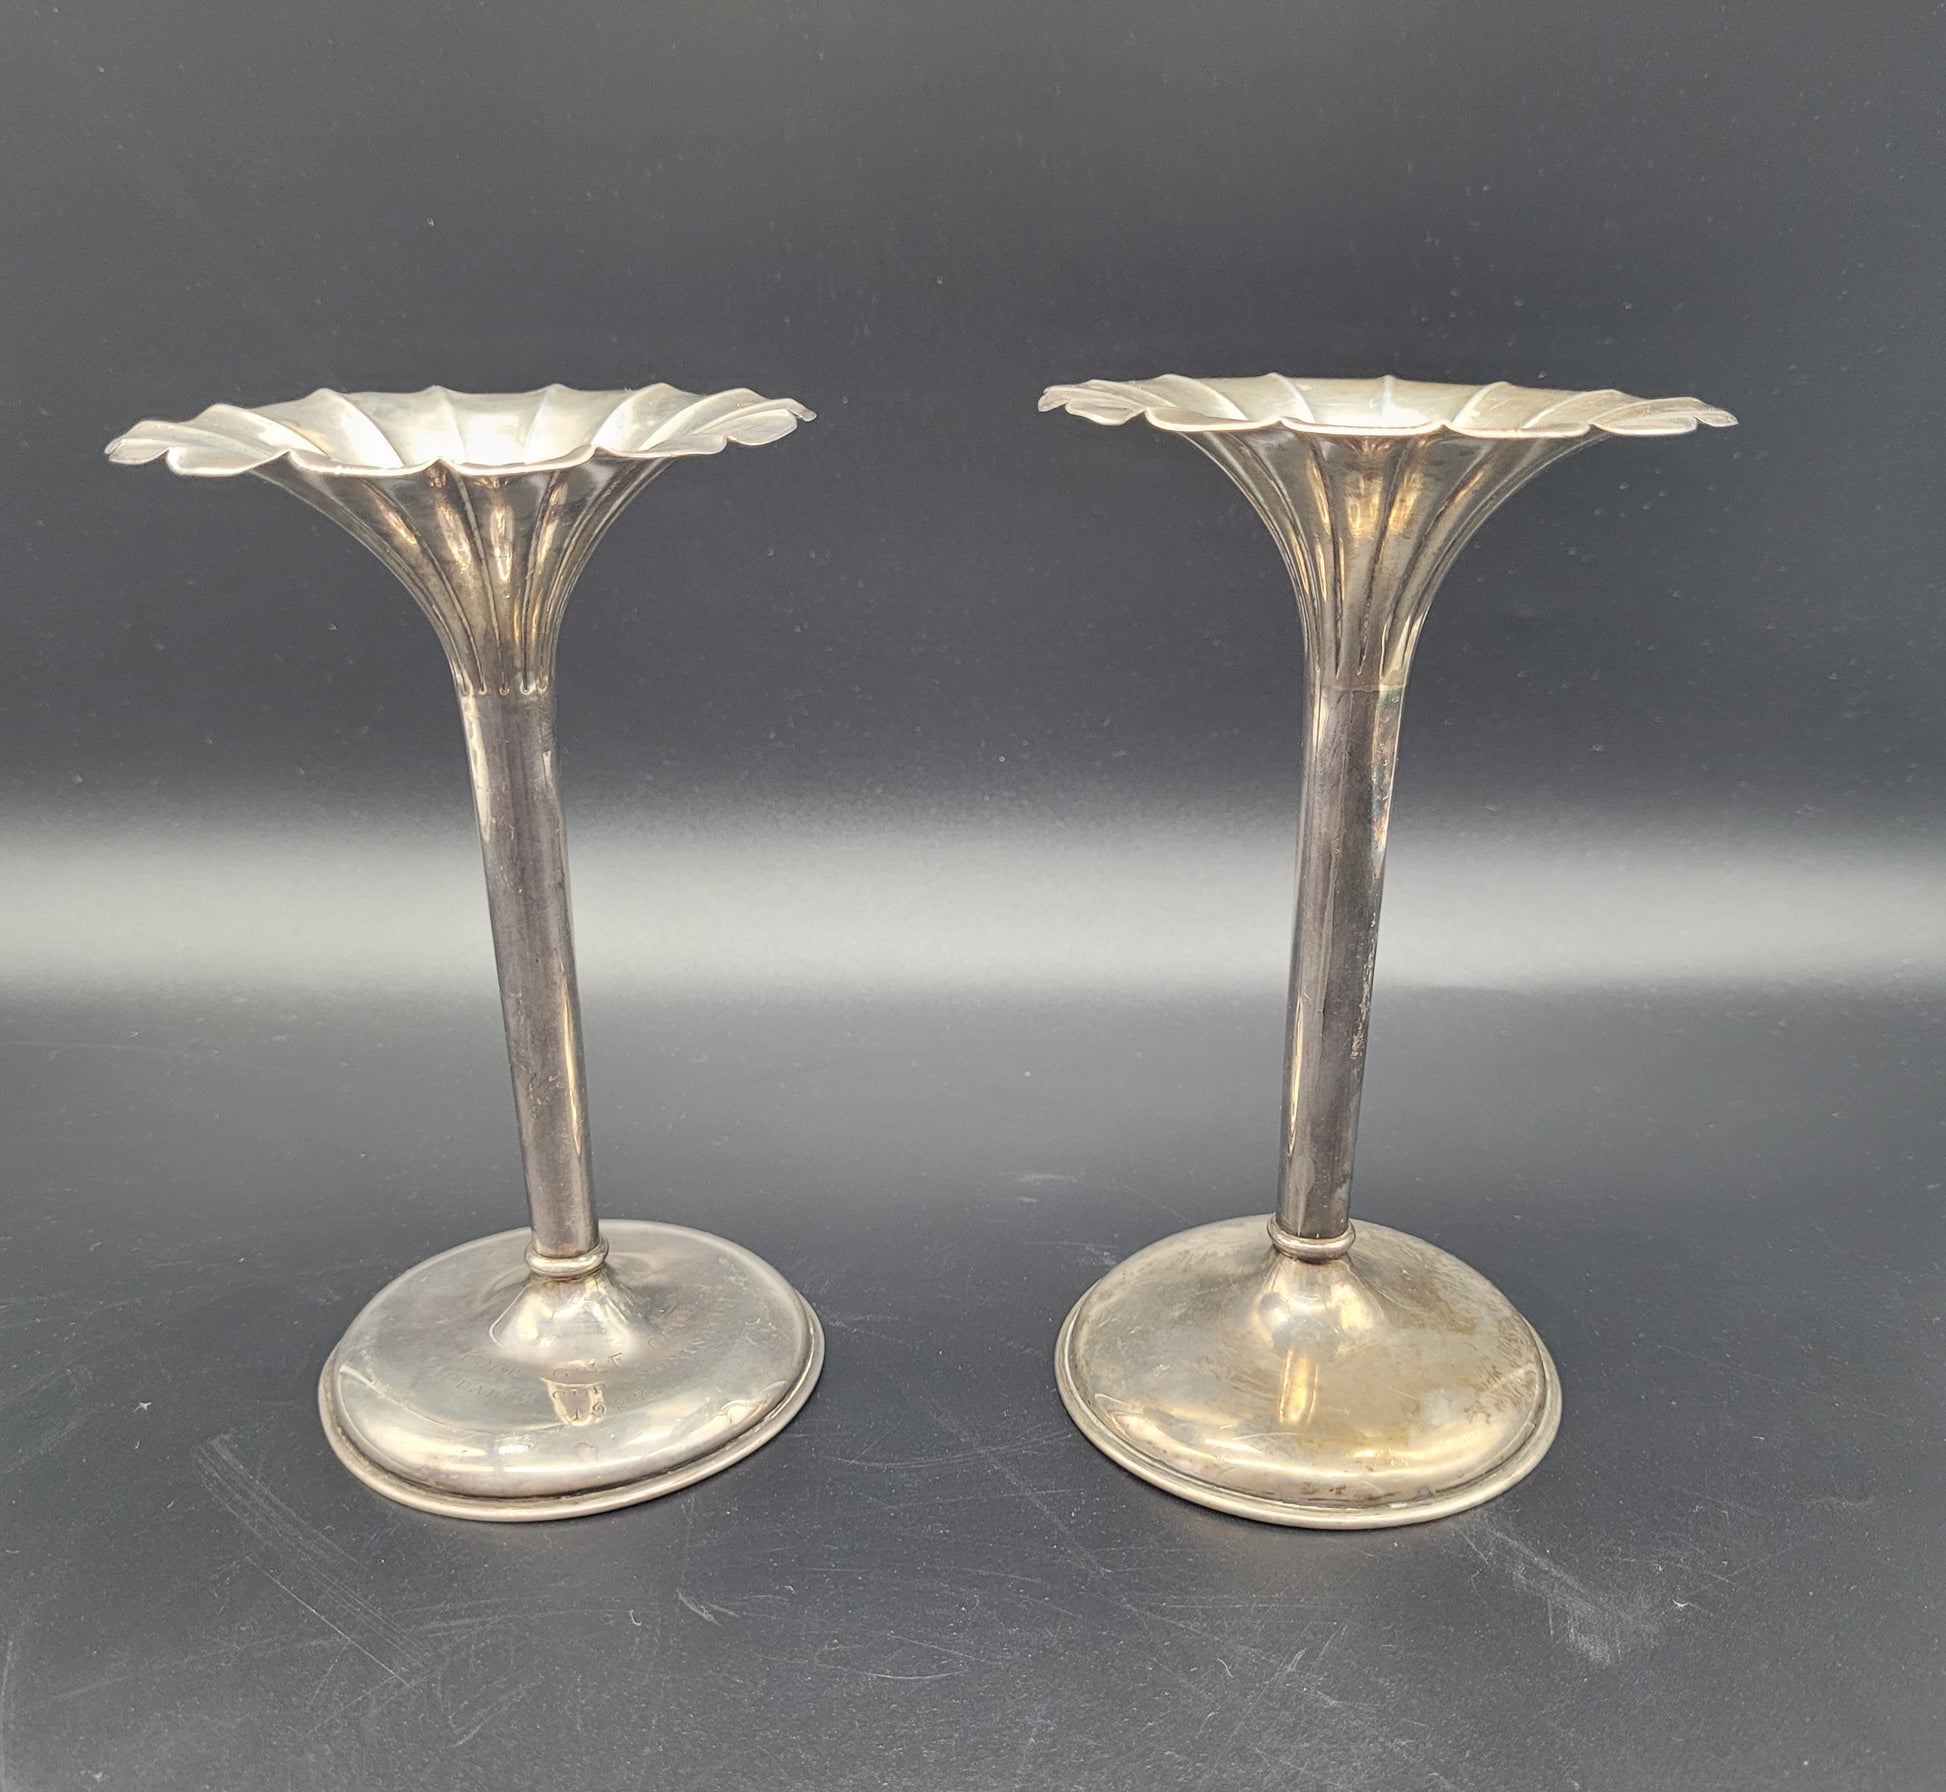 ANTIQUES & COLLECTABLES USA A very nice pair of sterling silver tulip posy vases, each set with fanned rims and graduated bases. With an inscription relating to a golfing competition. 